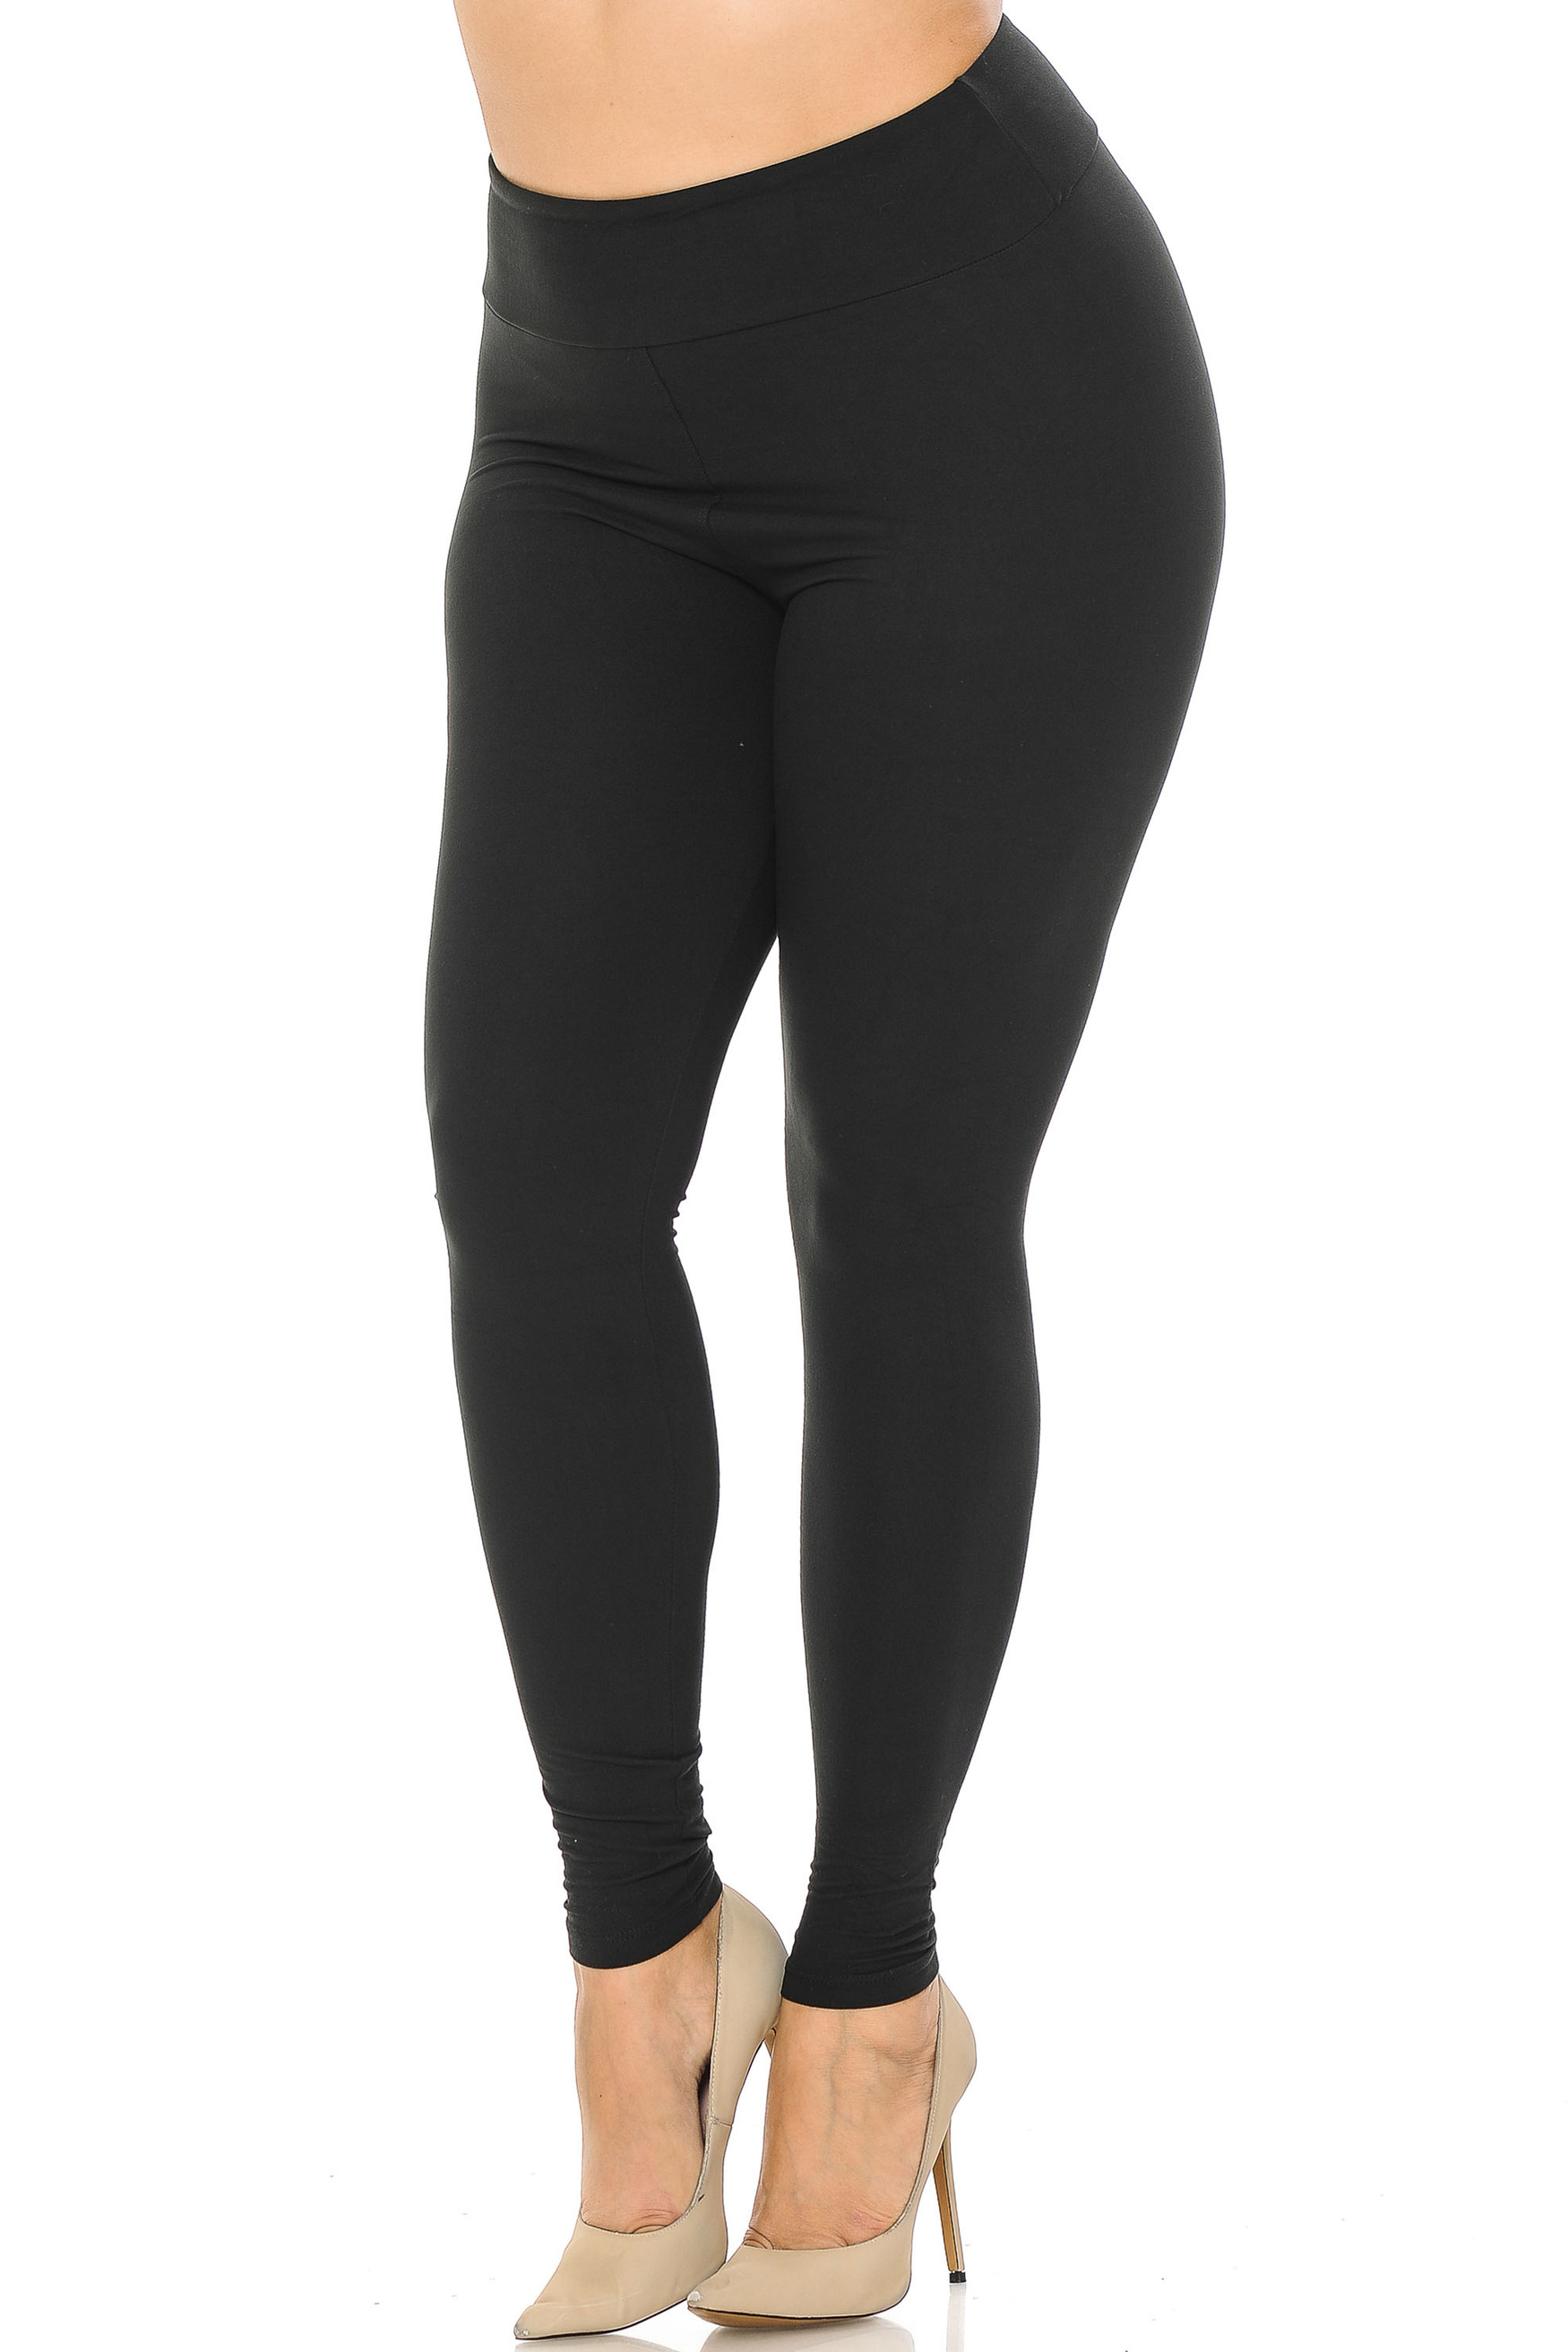 Buttery Soft Basic Solid Plus Size Leggings - EEVEE - 3 Inch